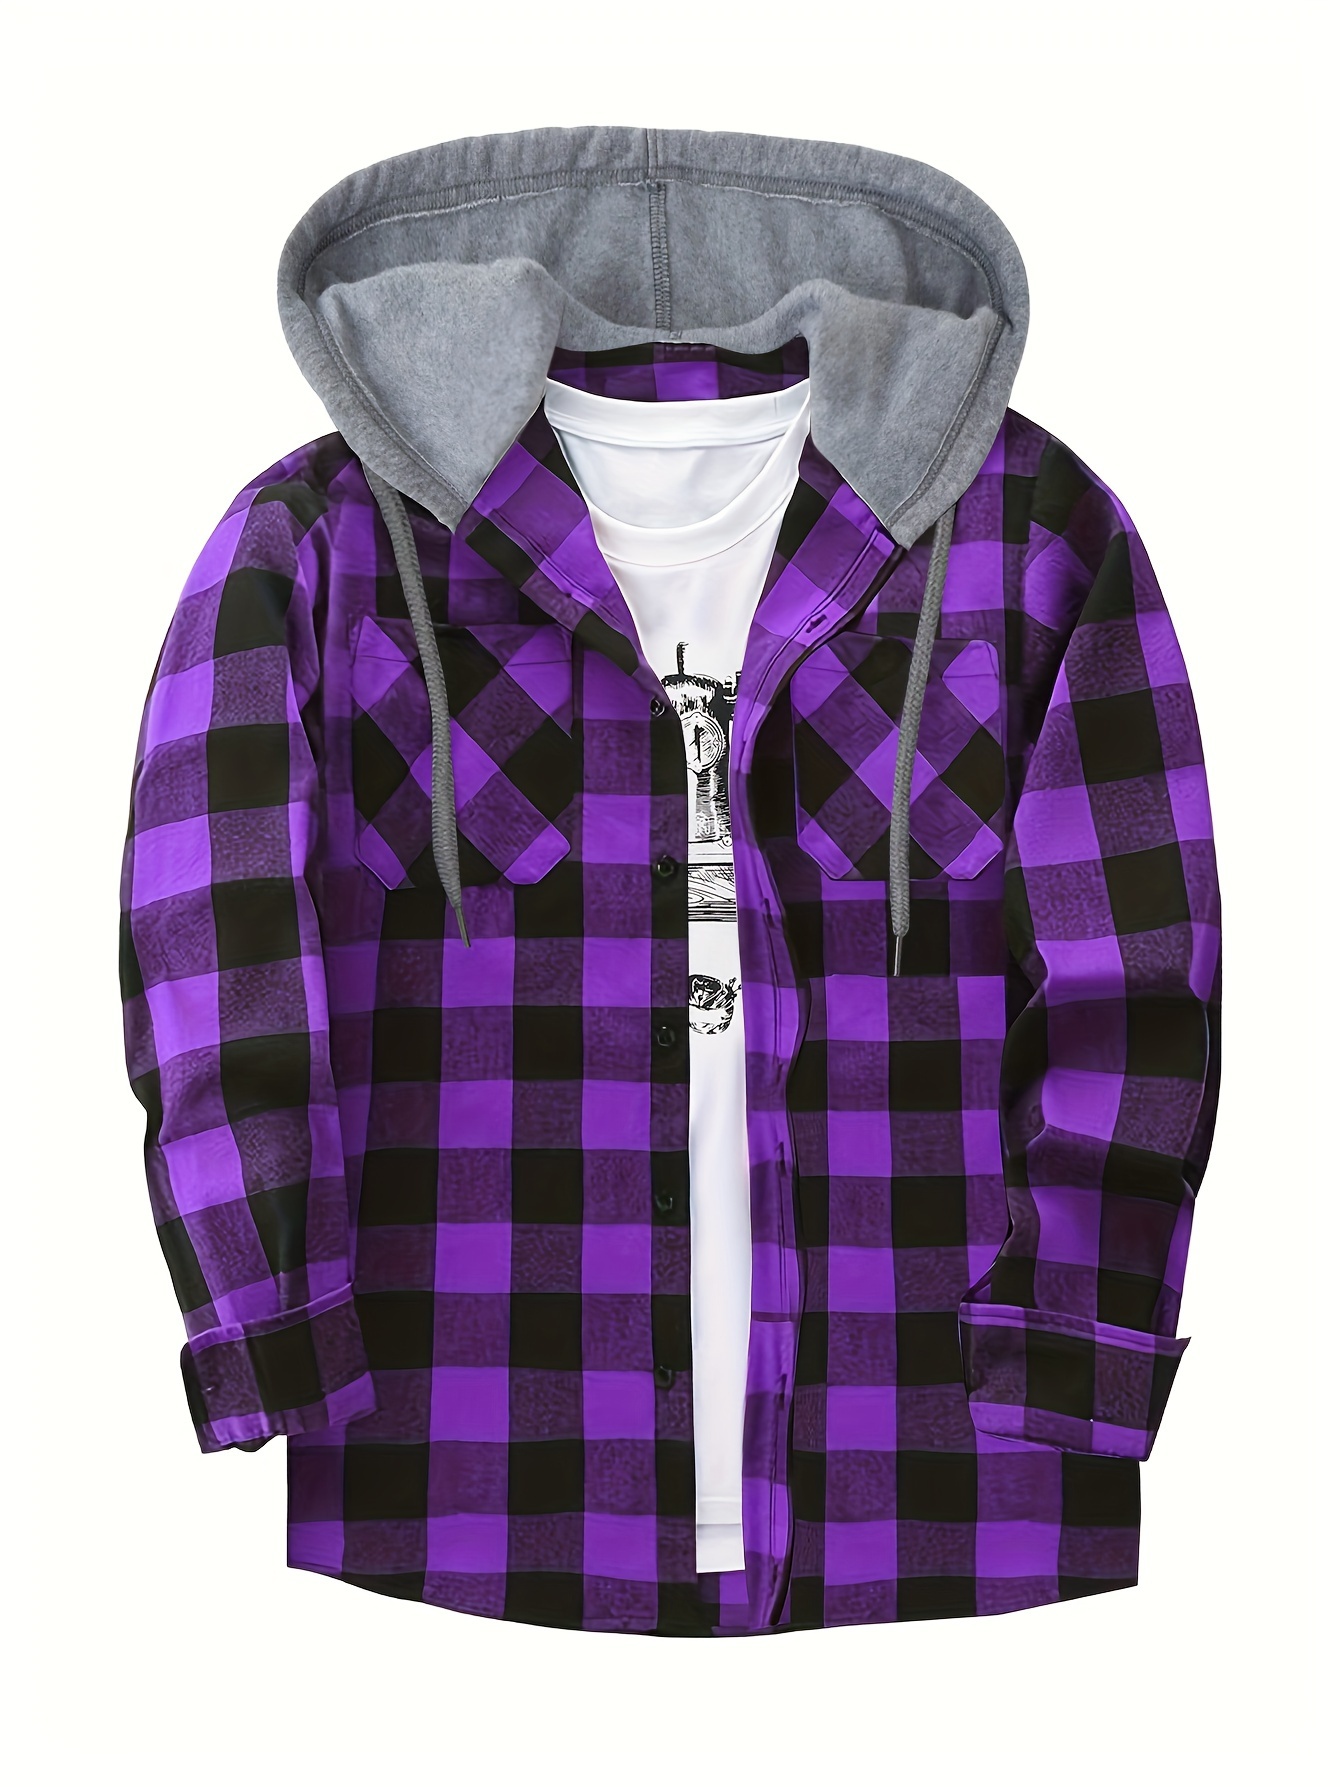 Long Sleeve Casual Regular Fit Button Up Hooded Shirts Jacket, Plaid Shirt Coat For Men